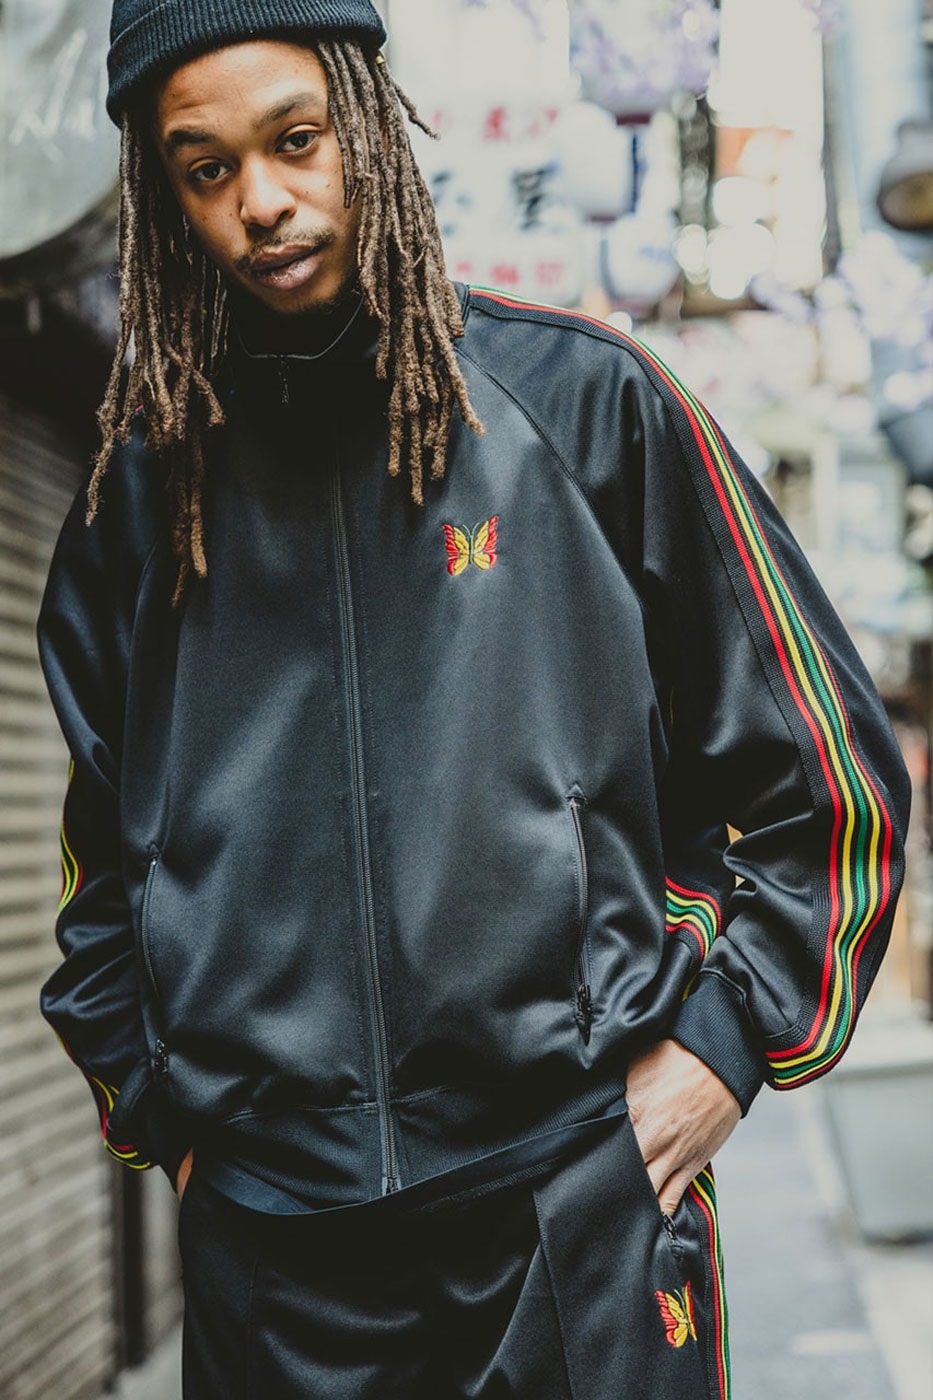 BLACK TRACKSUIT BOTTOMS WITH RASTA COLOURS RED YELLOW GREEN DOWN BOTH LEGS  ROOTS